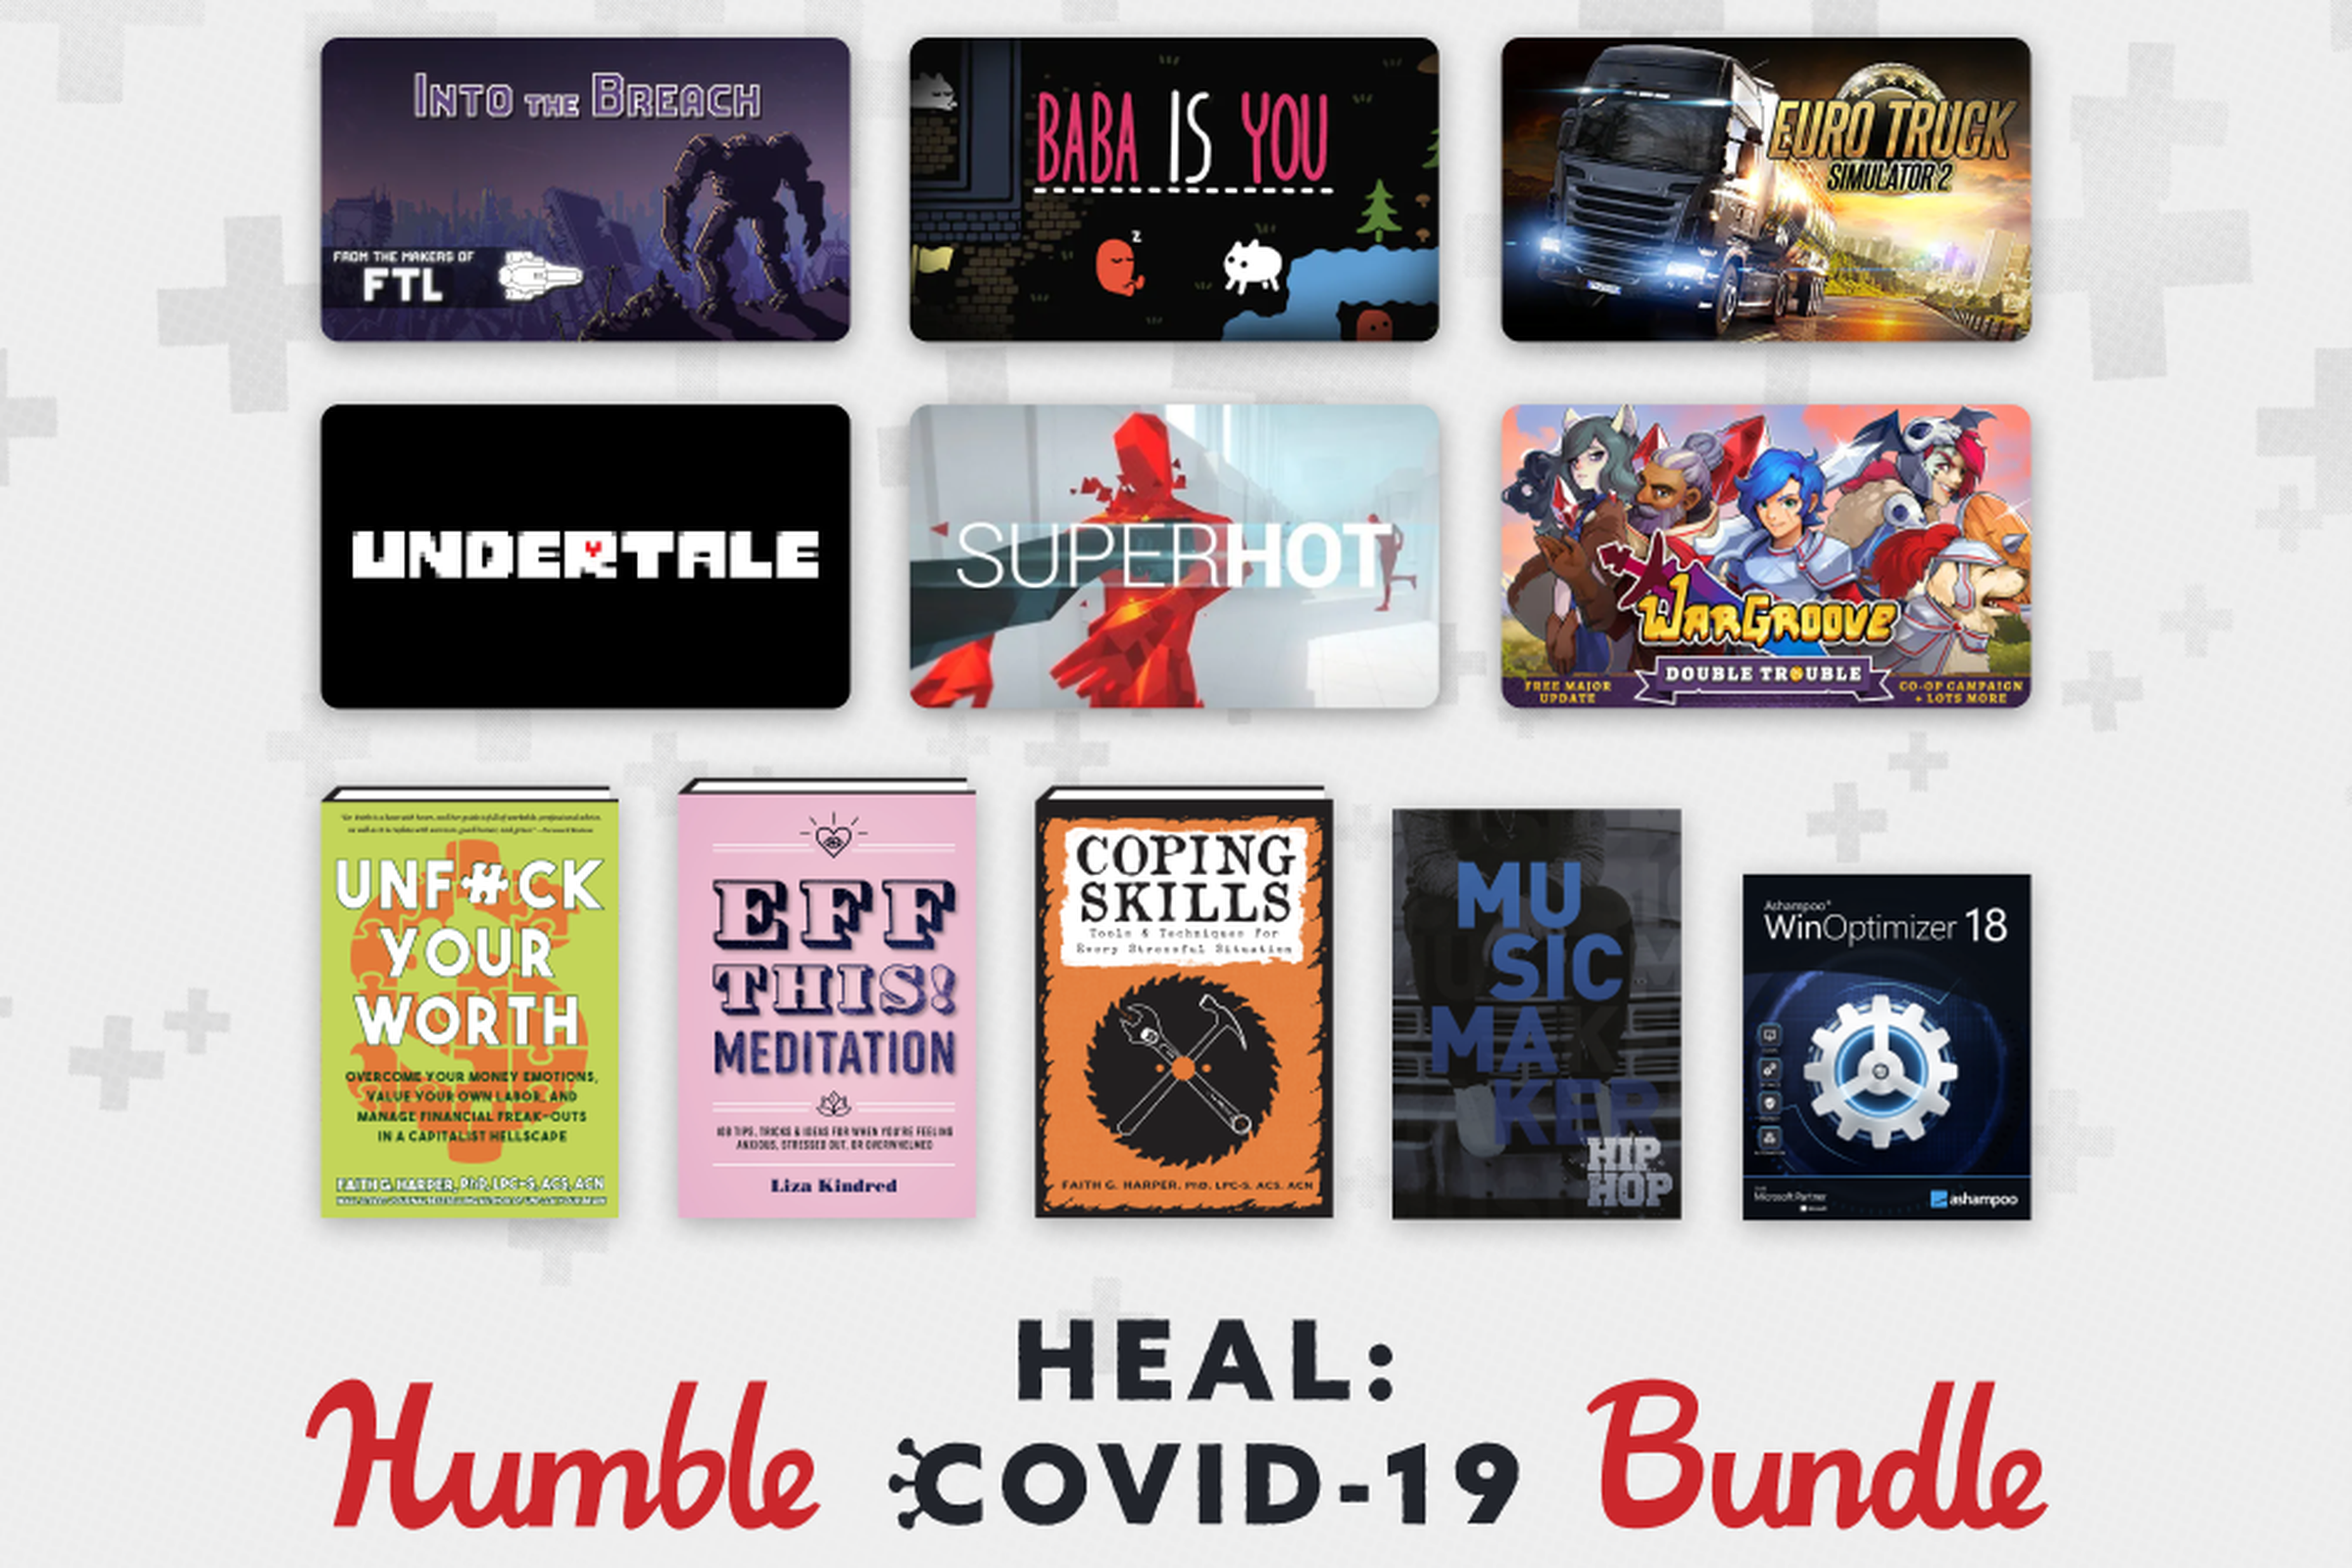 Some of what’s in the Humble Heal: COVID-19 Bundle.